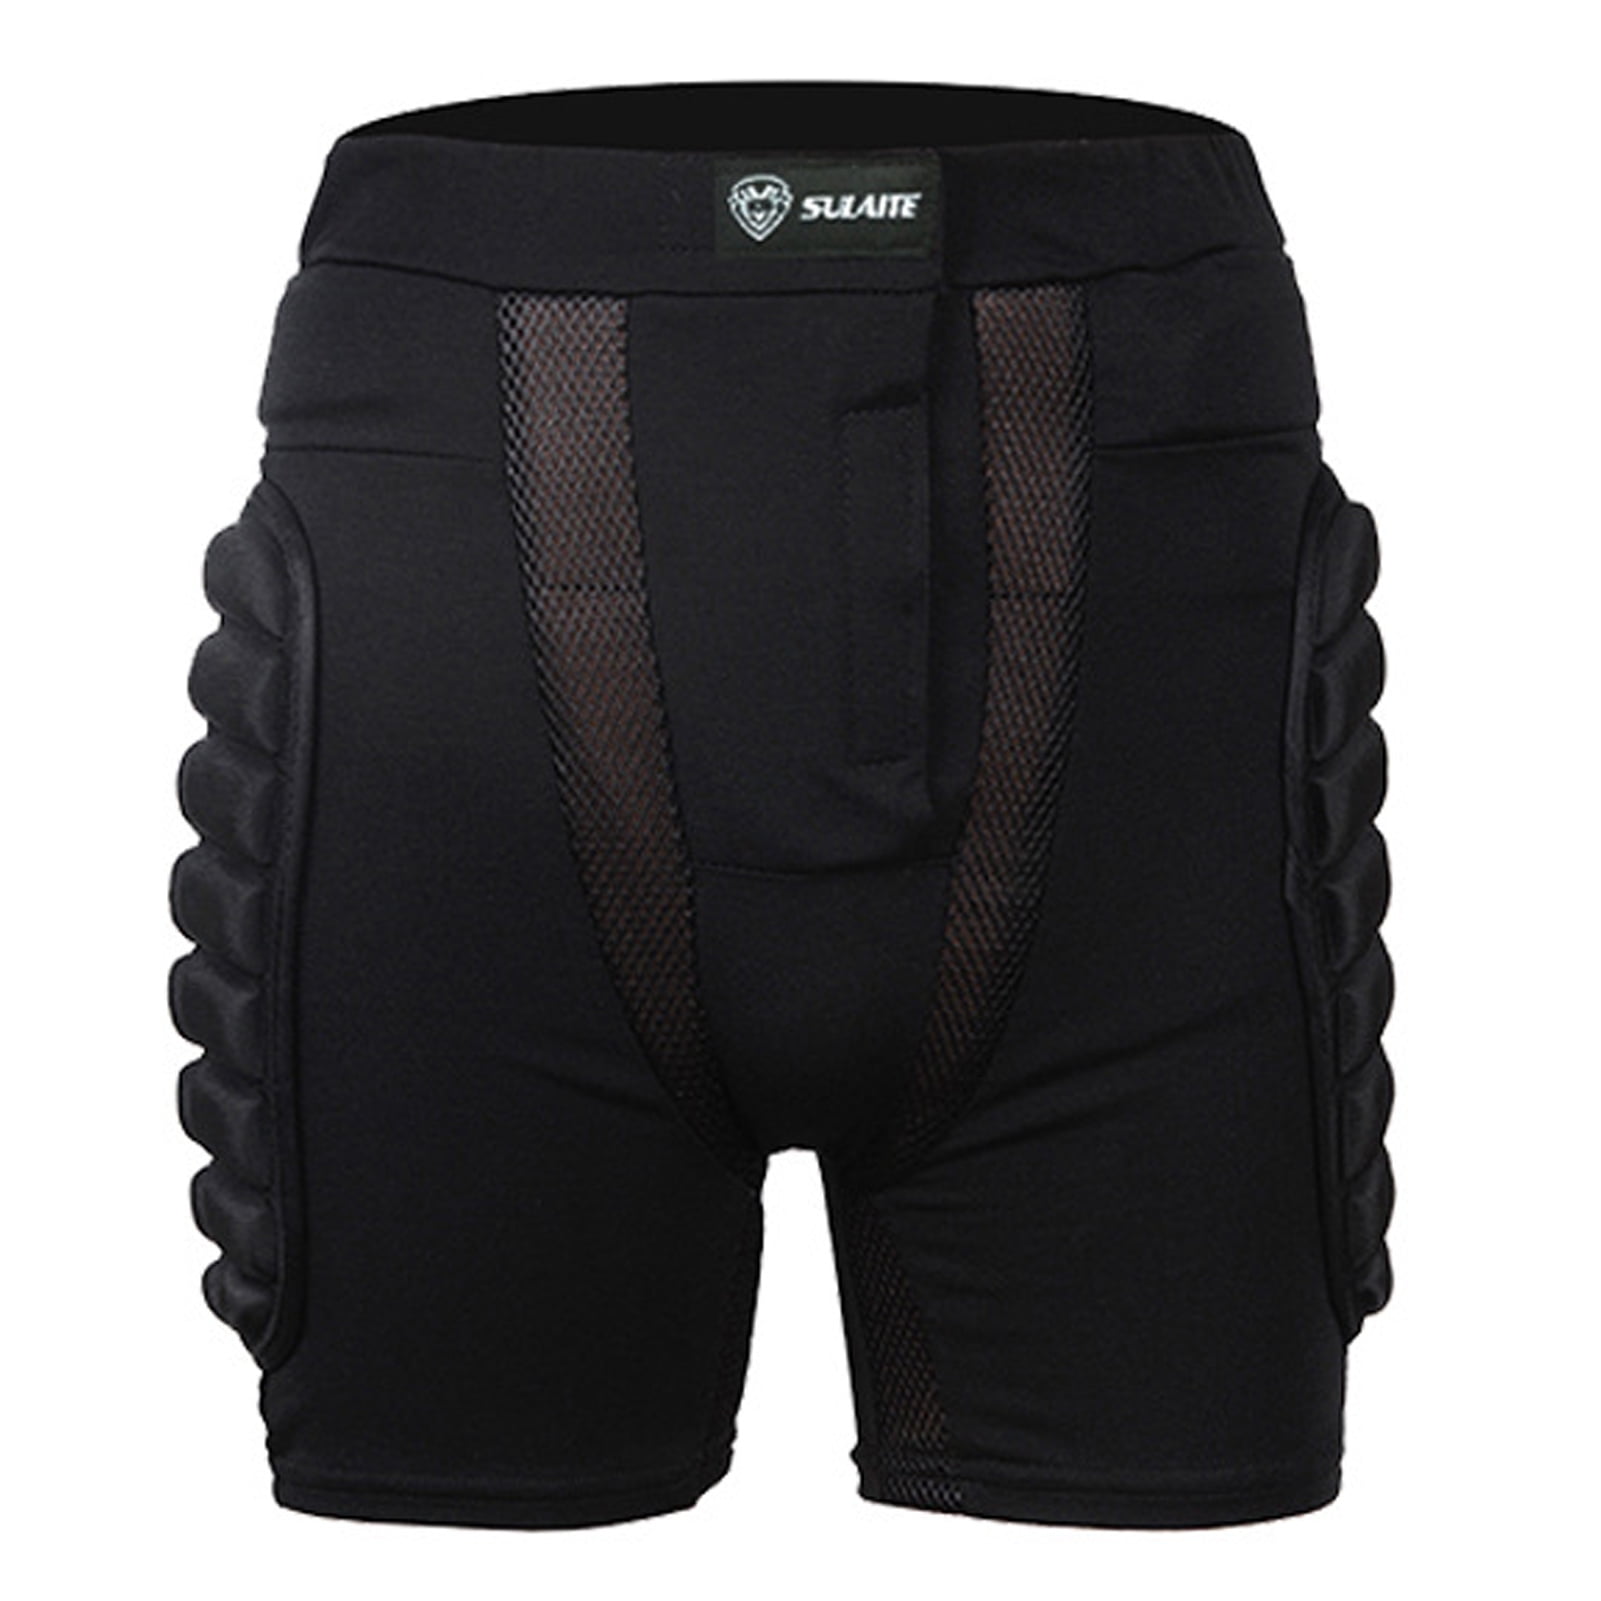 Armor Protective Padded Shorts Winter Sport Hip Protector for Skating Skiing 